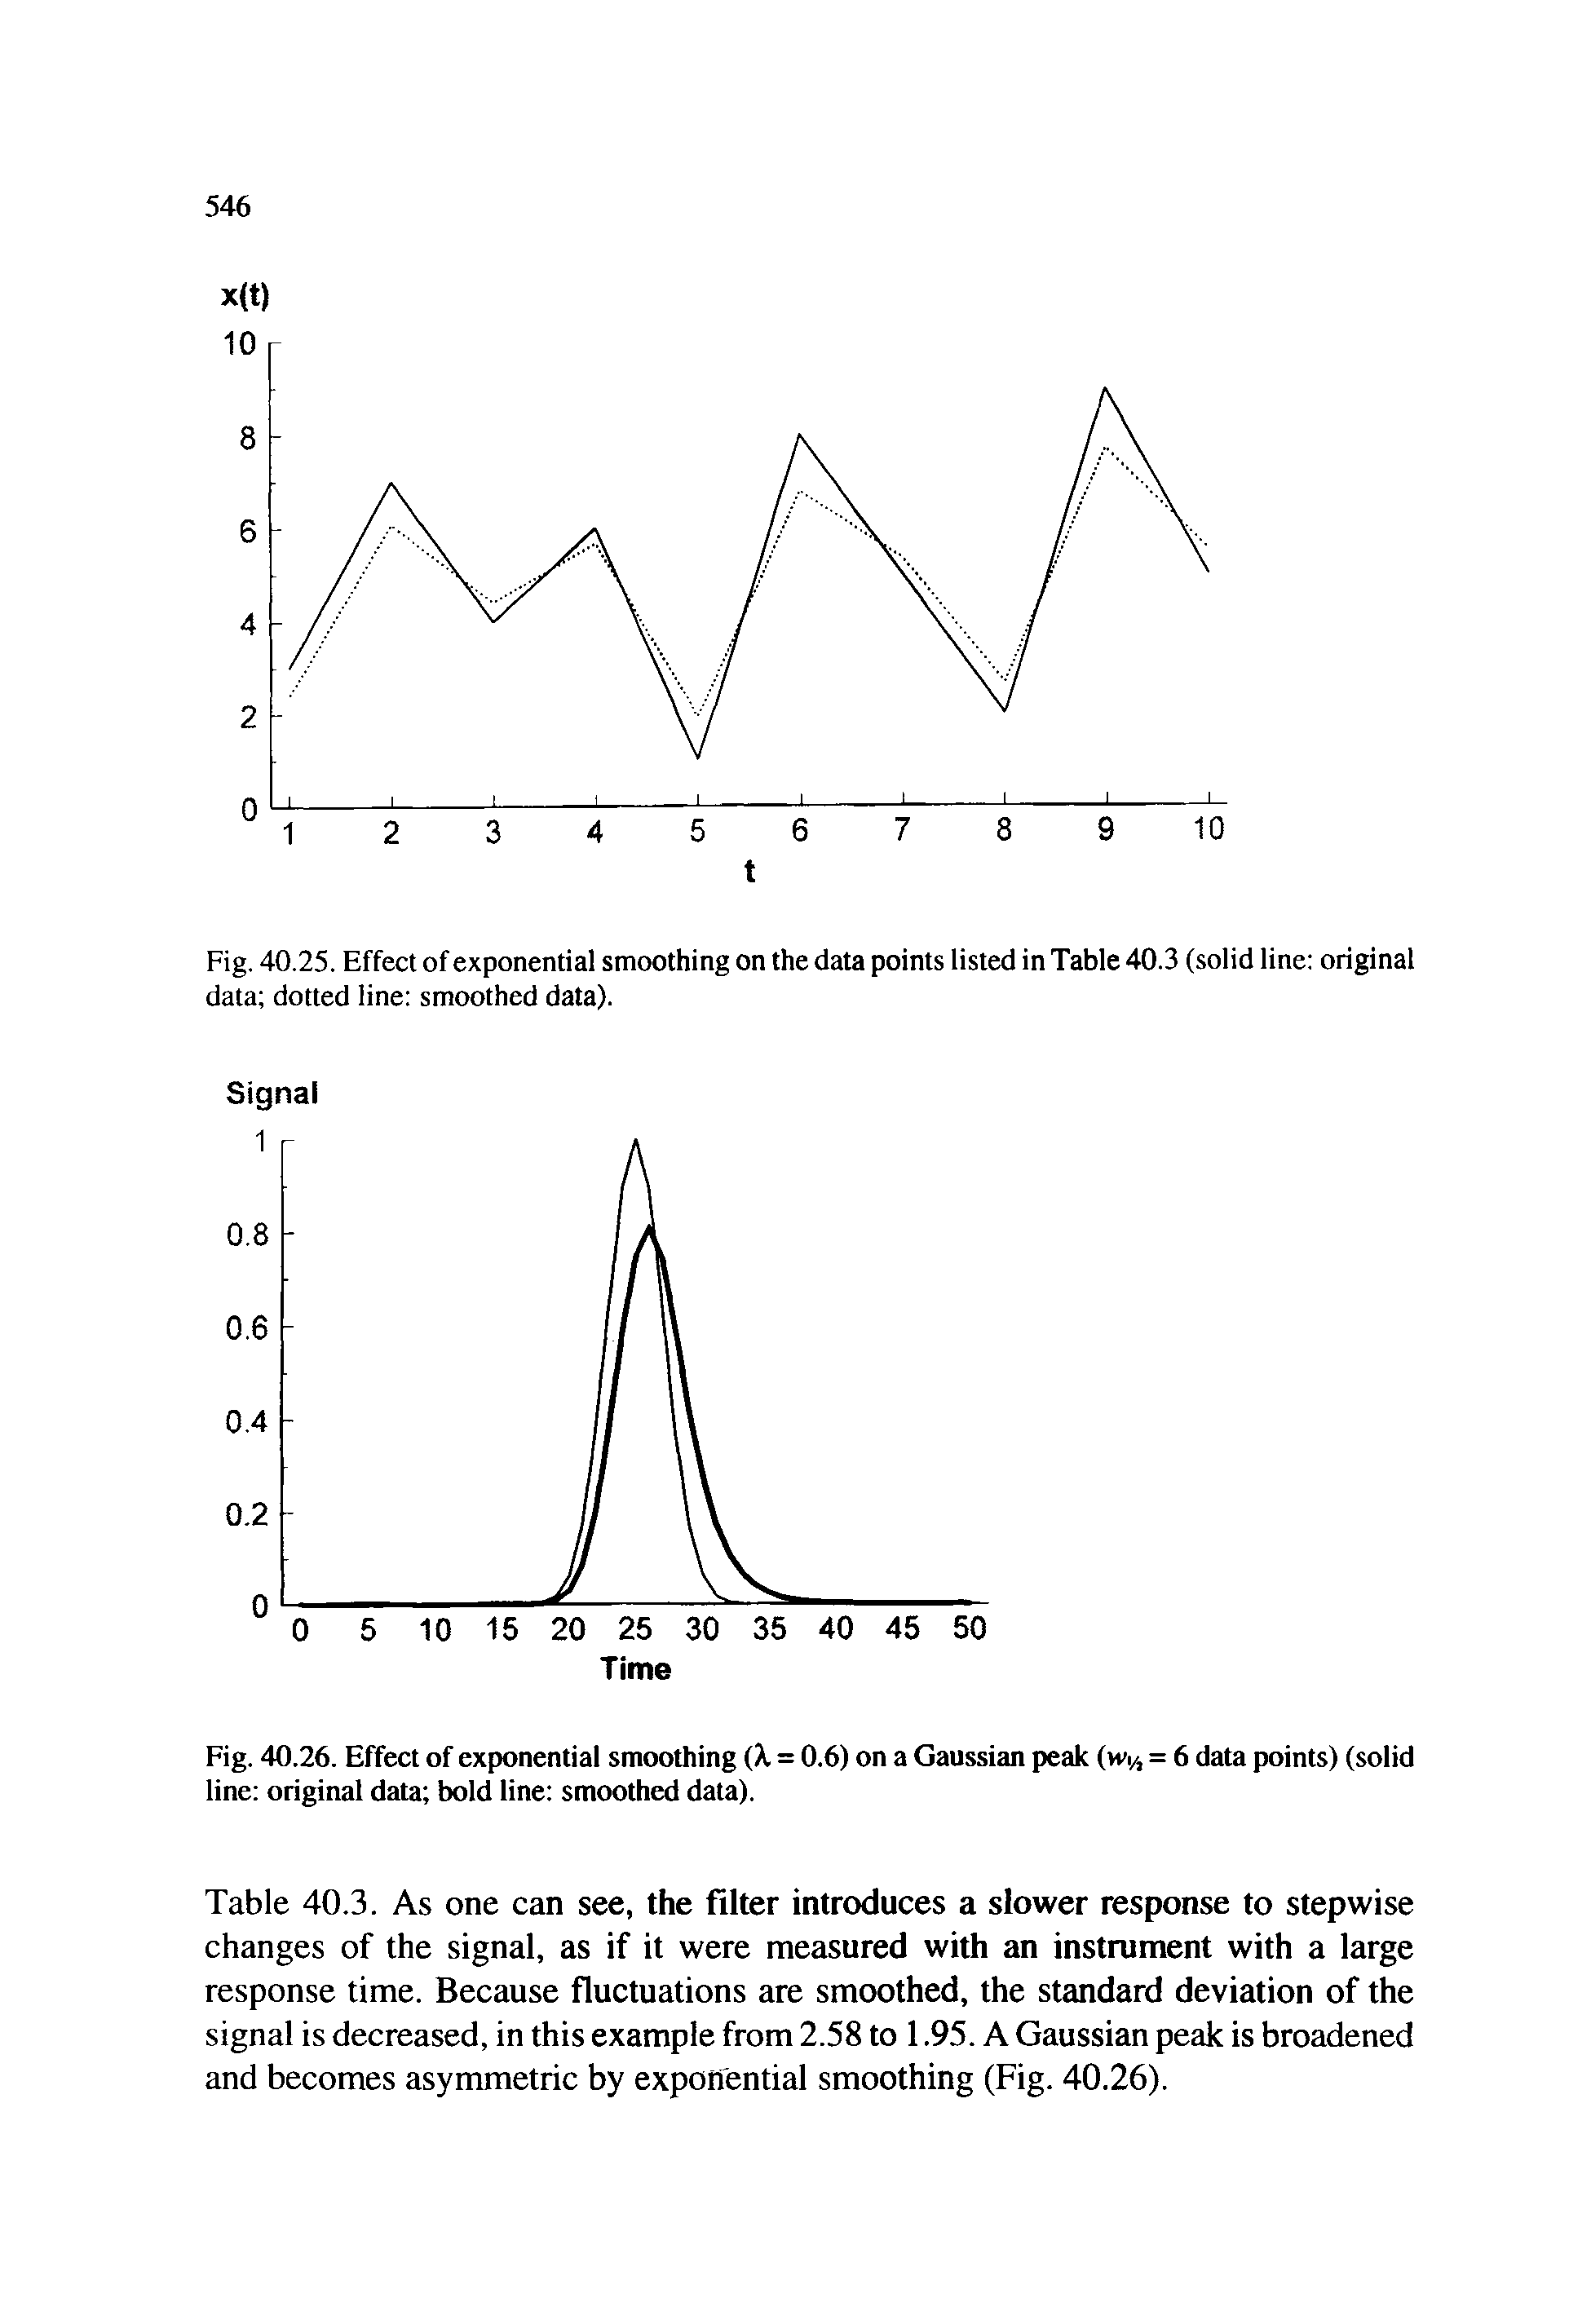 Table 40.3. As one can see, the filter introduces a slower response to stepwise changes of the signal, as if it were measured with an instrument with a large response time. Because fluctuations are smoothed, the standard deviation of the signal is decreased, in this example from 2.58 to 1.95. A Gaussian peak is broadened and becomes asymmetric by exponential smoothing (Fig. 40.26).